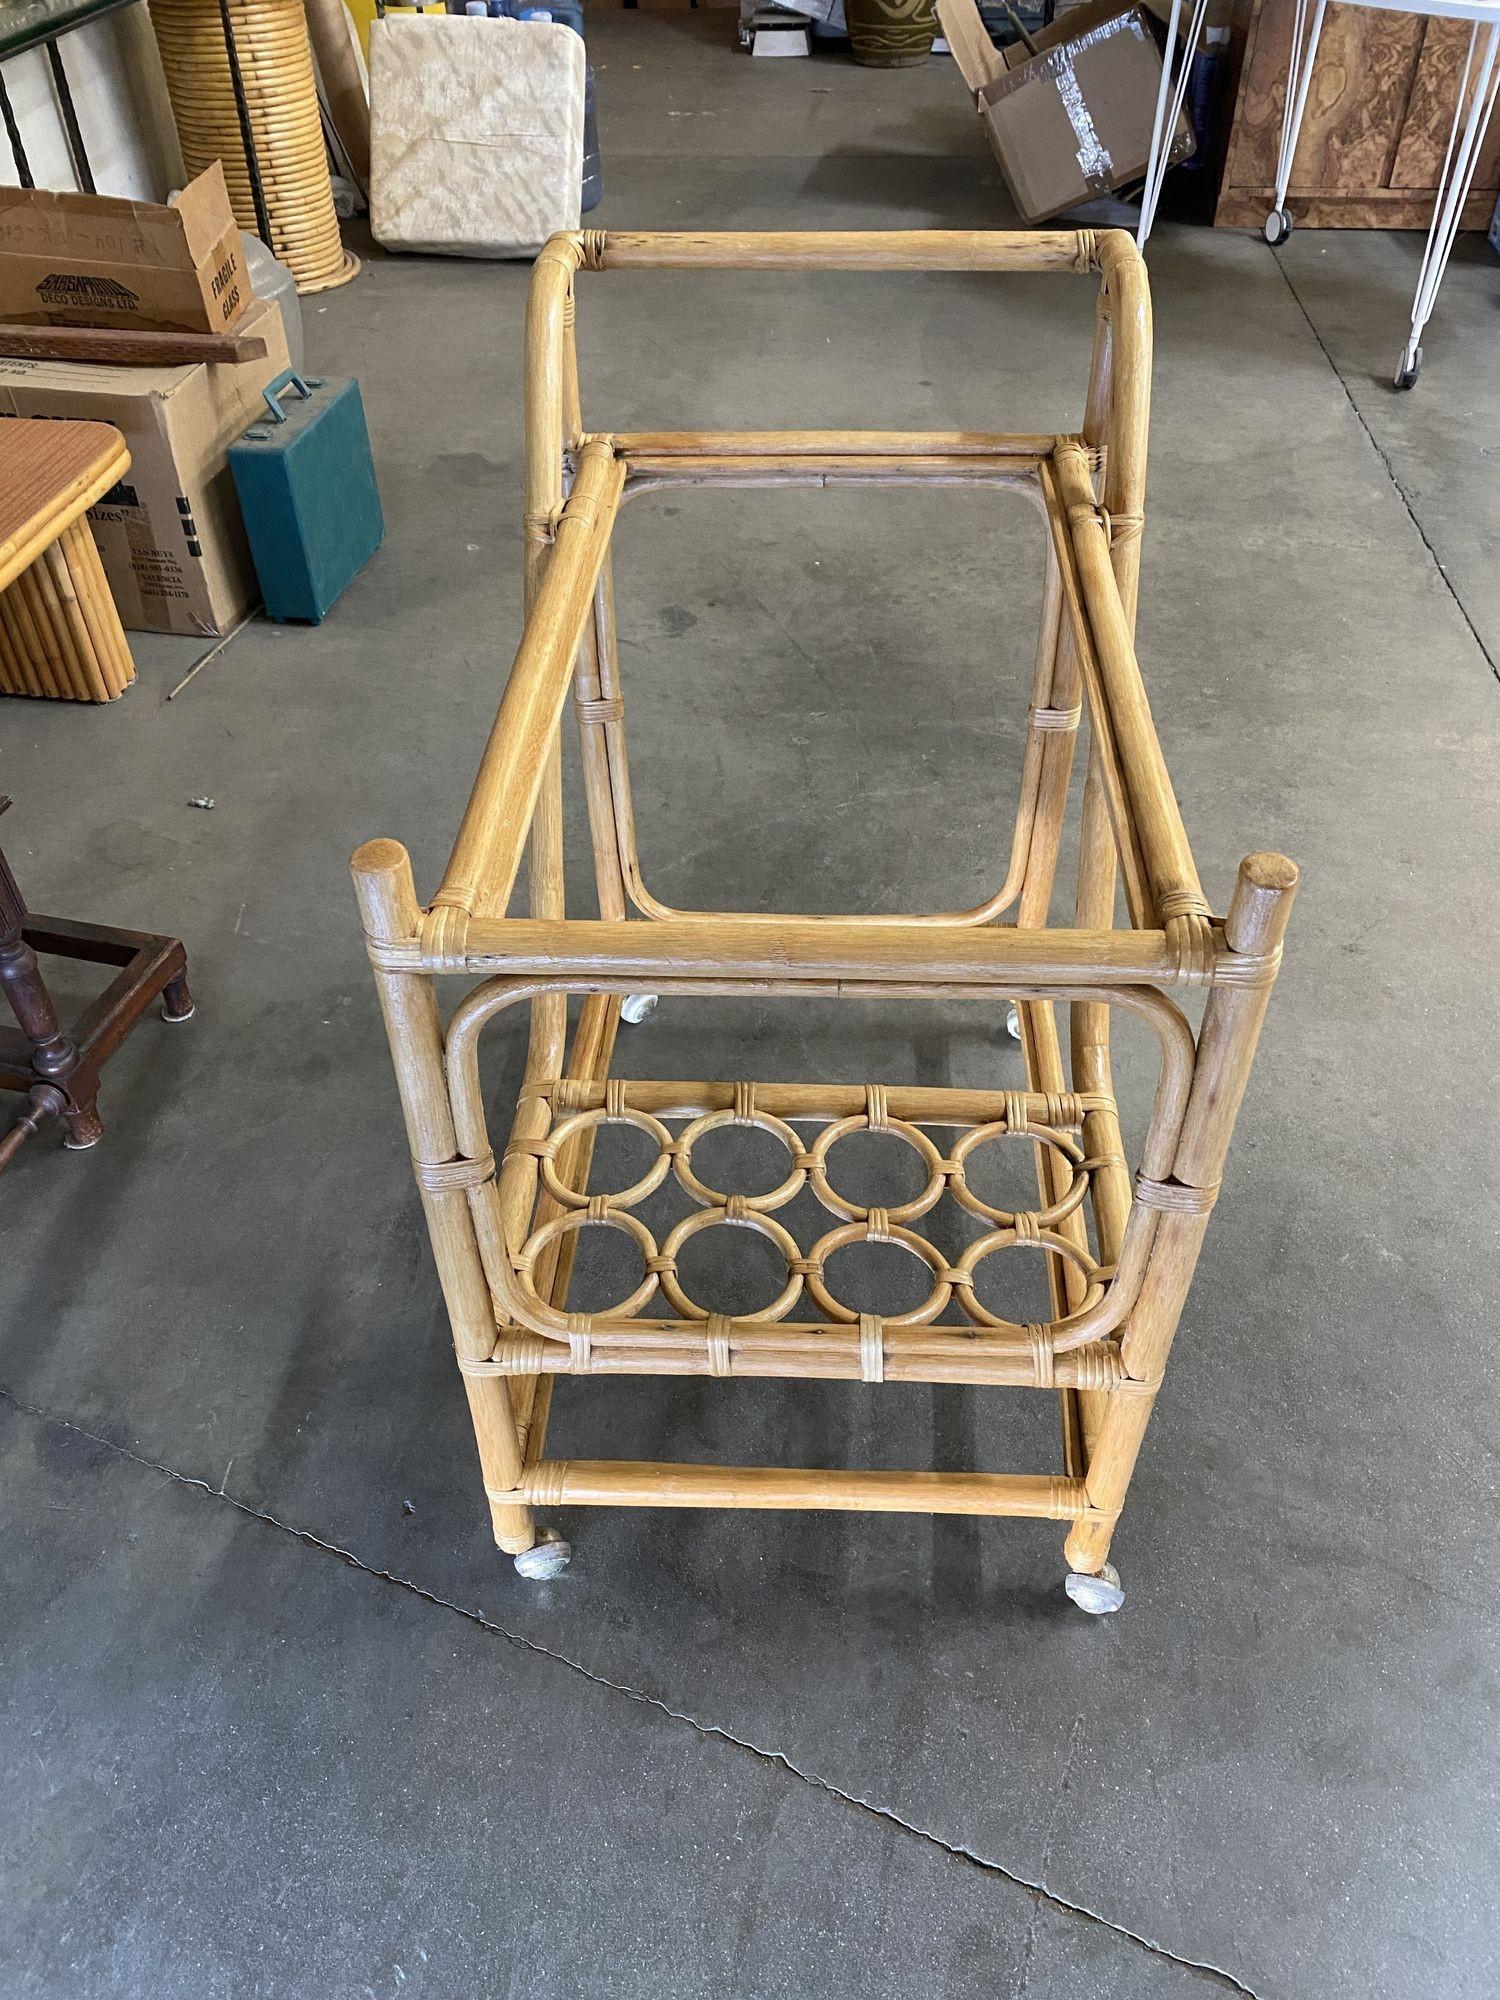 Restored Mid Century Rattan Bar Cart w/ Bottle Holder by Angraves, circa 1970 In Excellent Condition For Sale In Van Nuys, CA